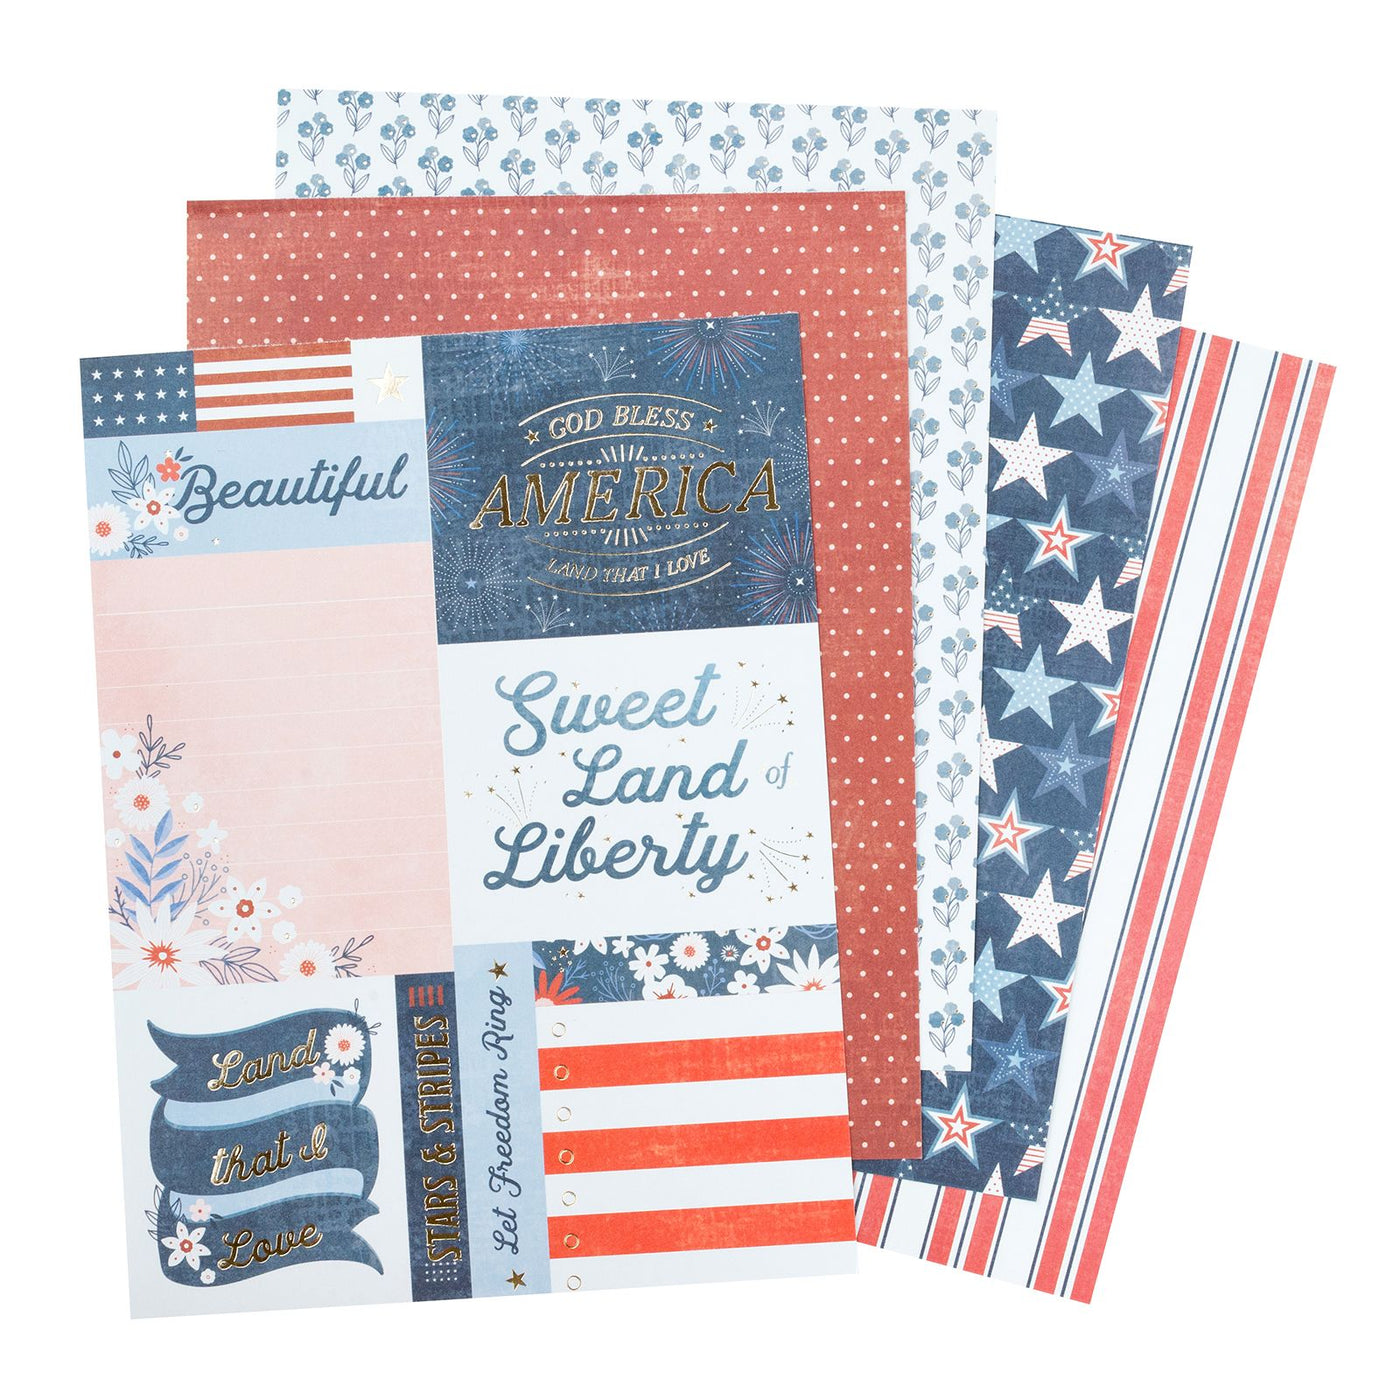 FLAGS AND FRILLS - 6x8 Paper Pad - 36 Sheets - American Crafts